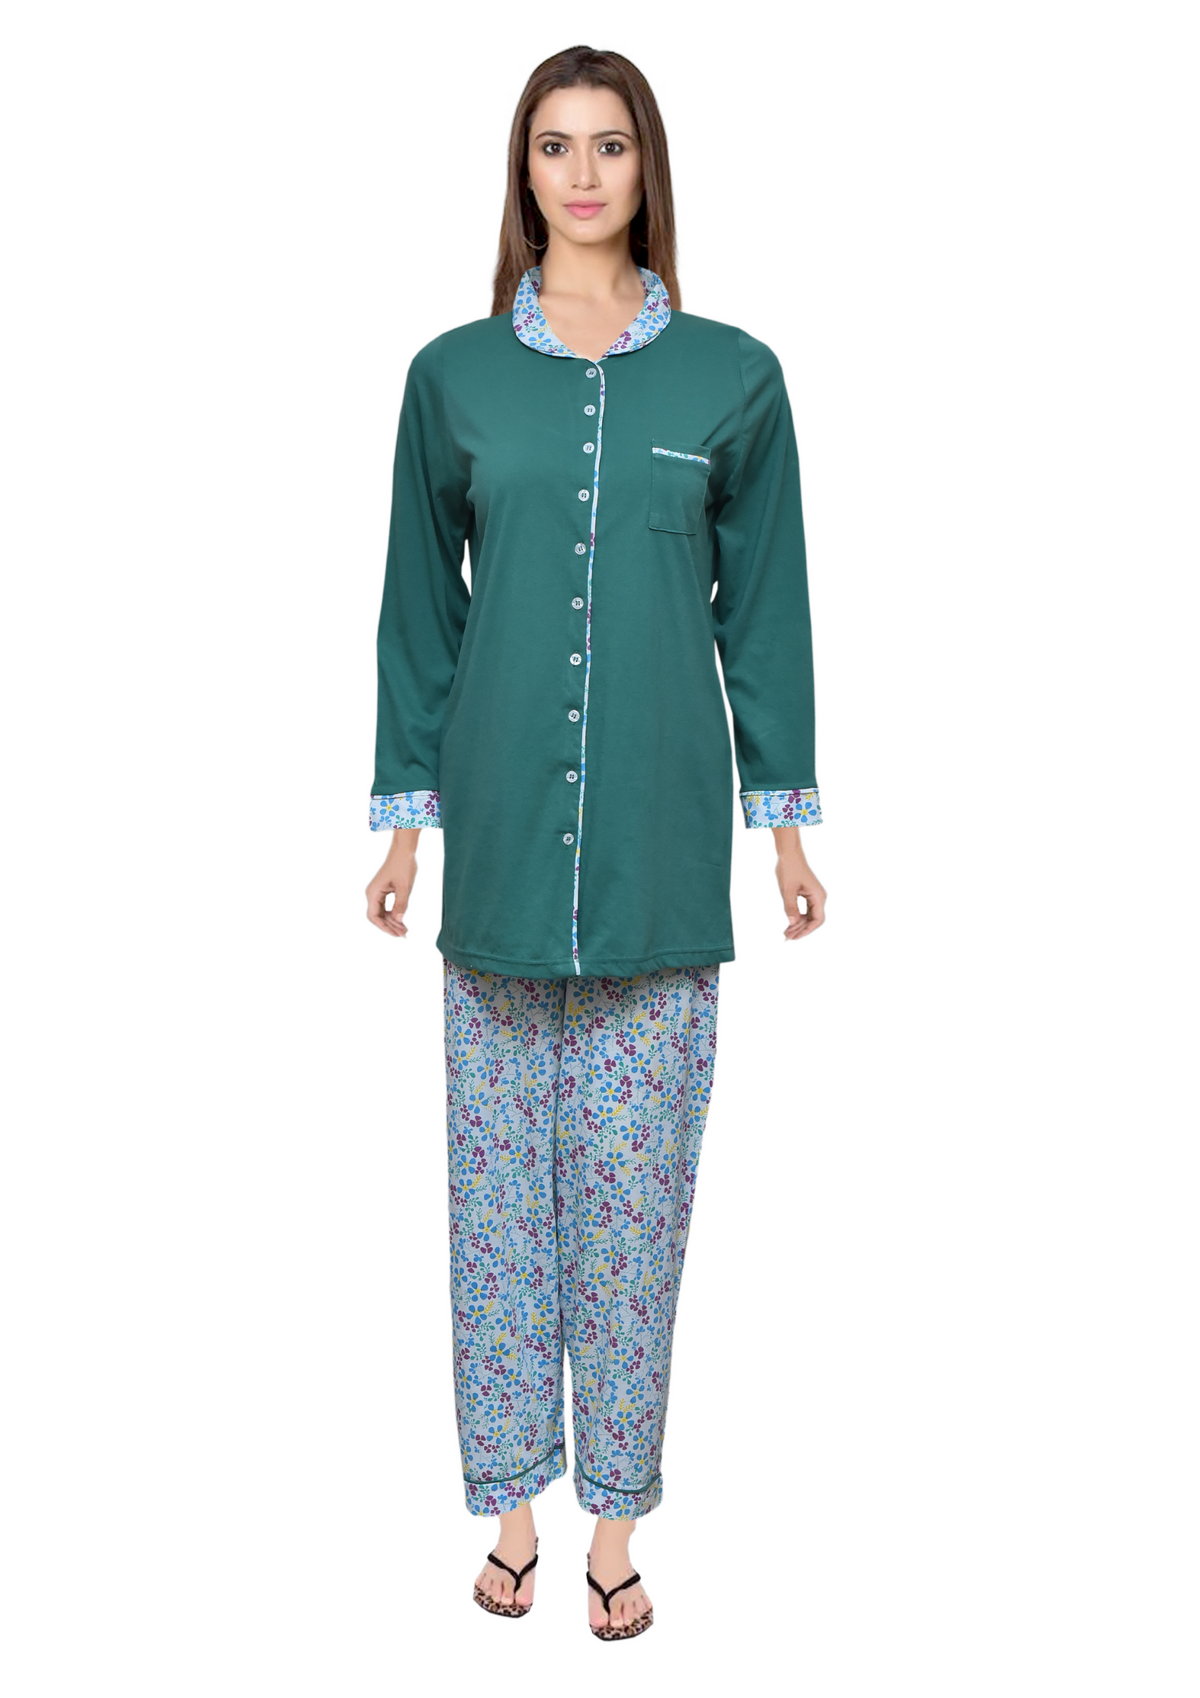 Women's Buttoned Night Suit